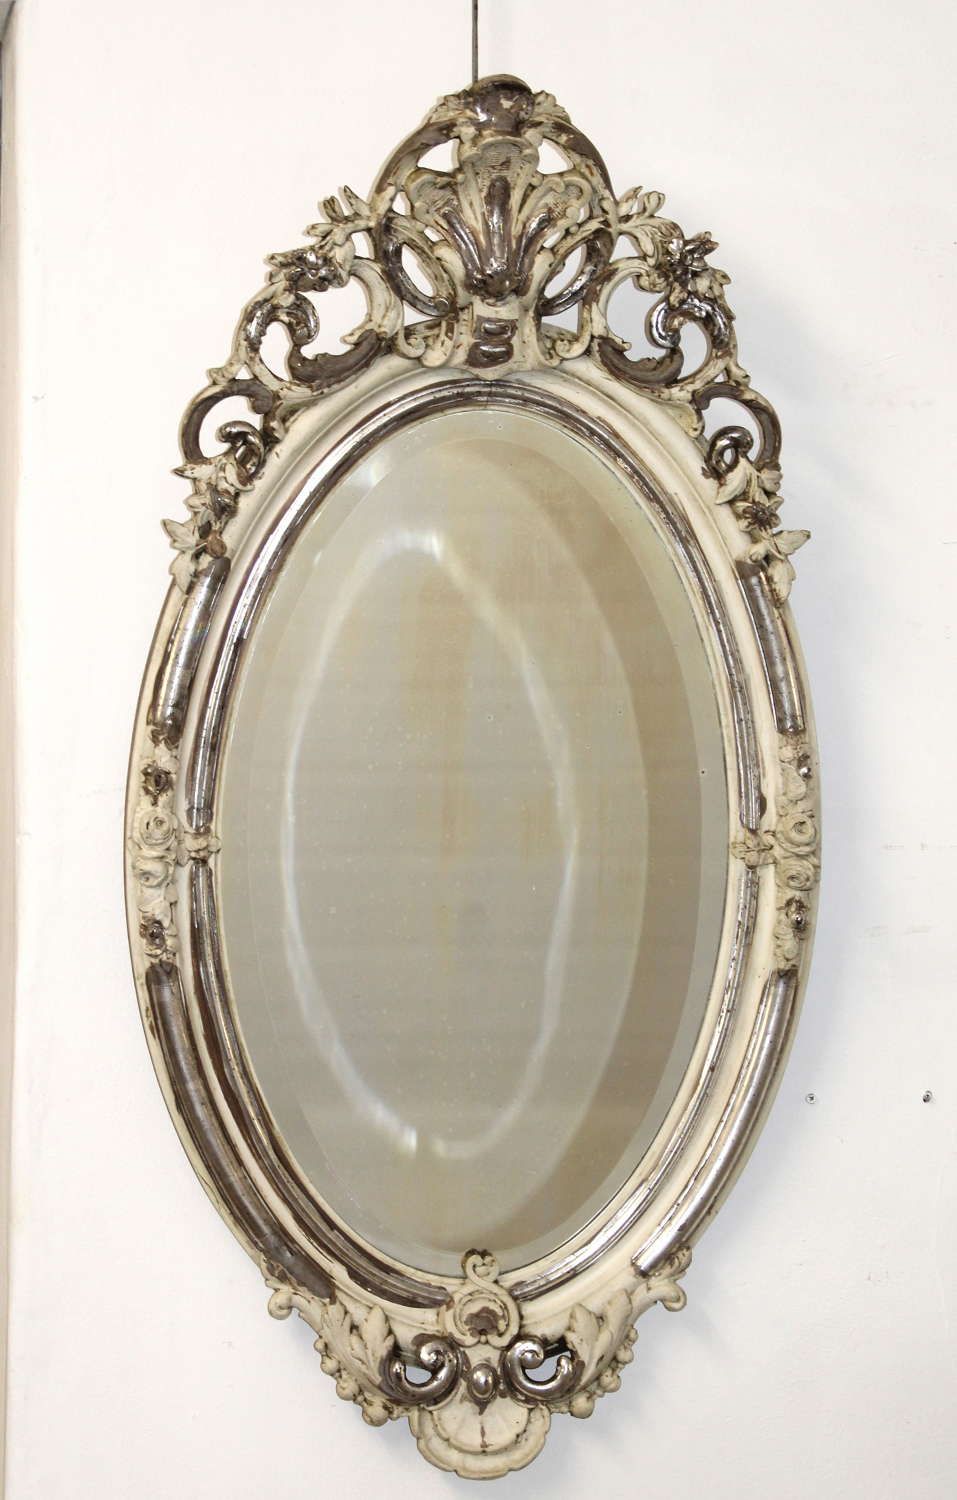 Vintage Silver And Cream Oval Mirror Intended For Antique Silver Oval Wall Mirrors (View 7 of 15)